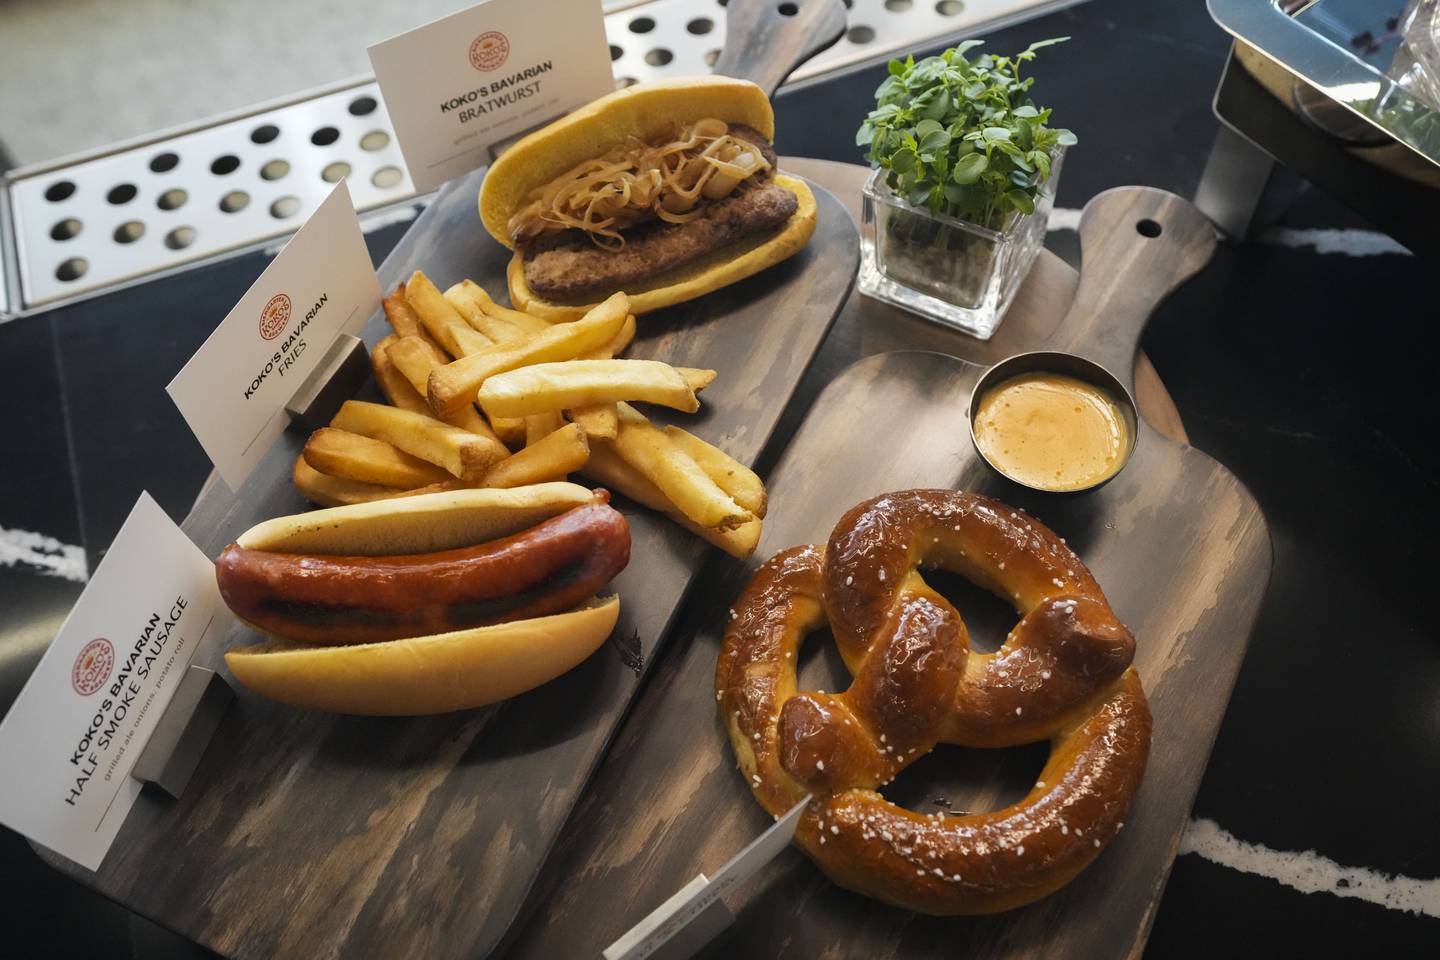 The new menu items include pretzels with beer cheese, hotdogs and sausages.